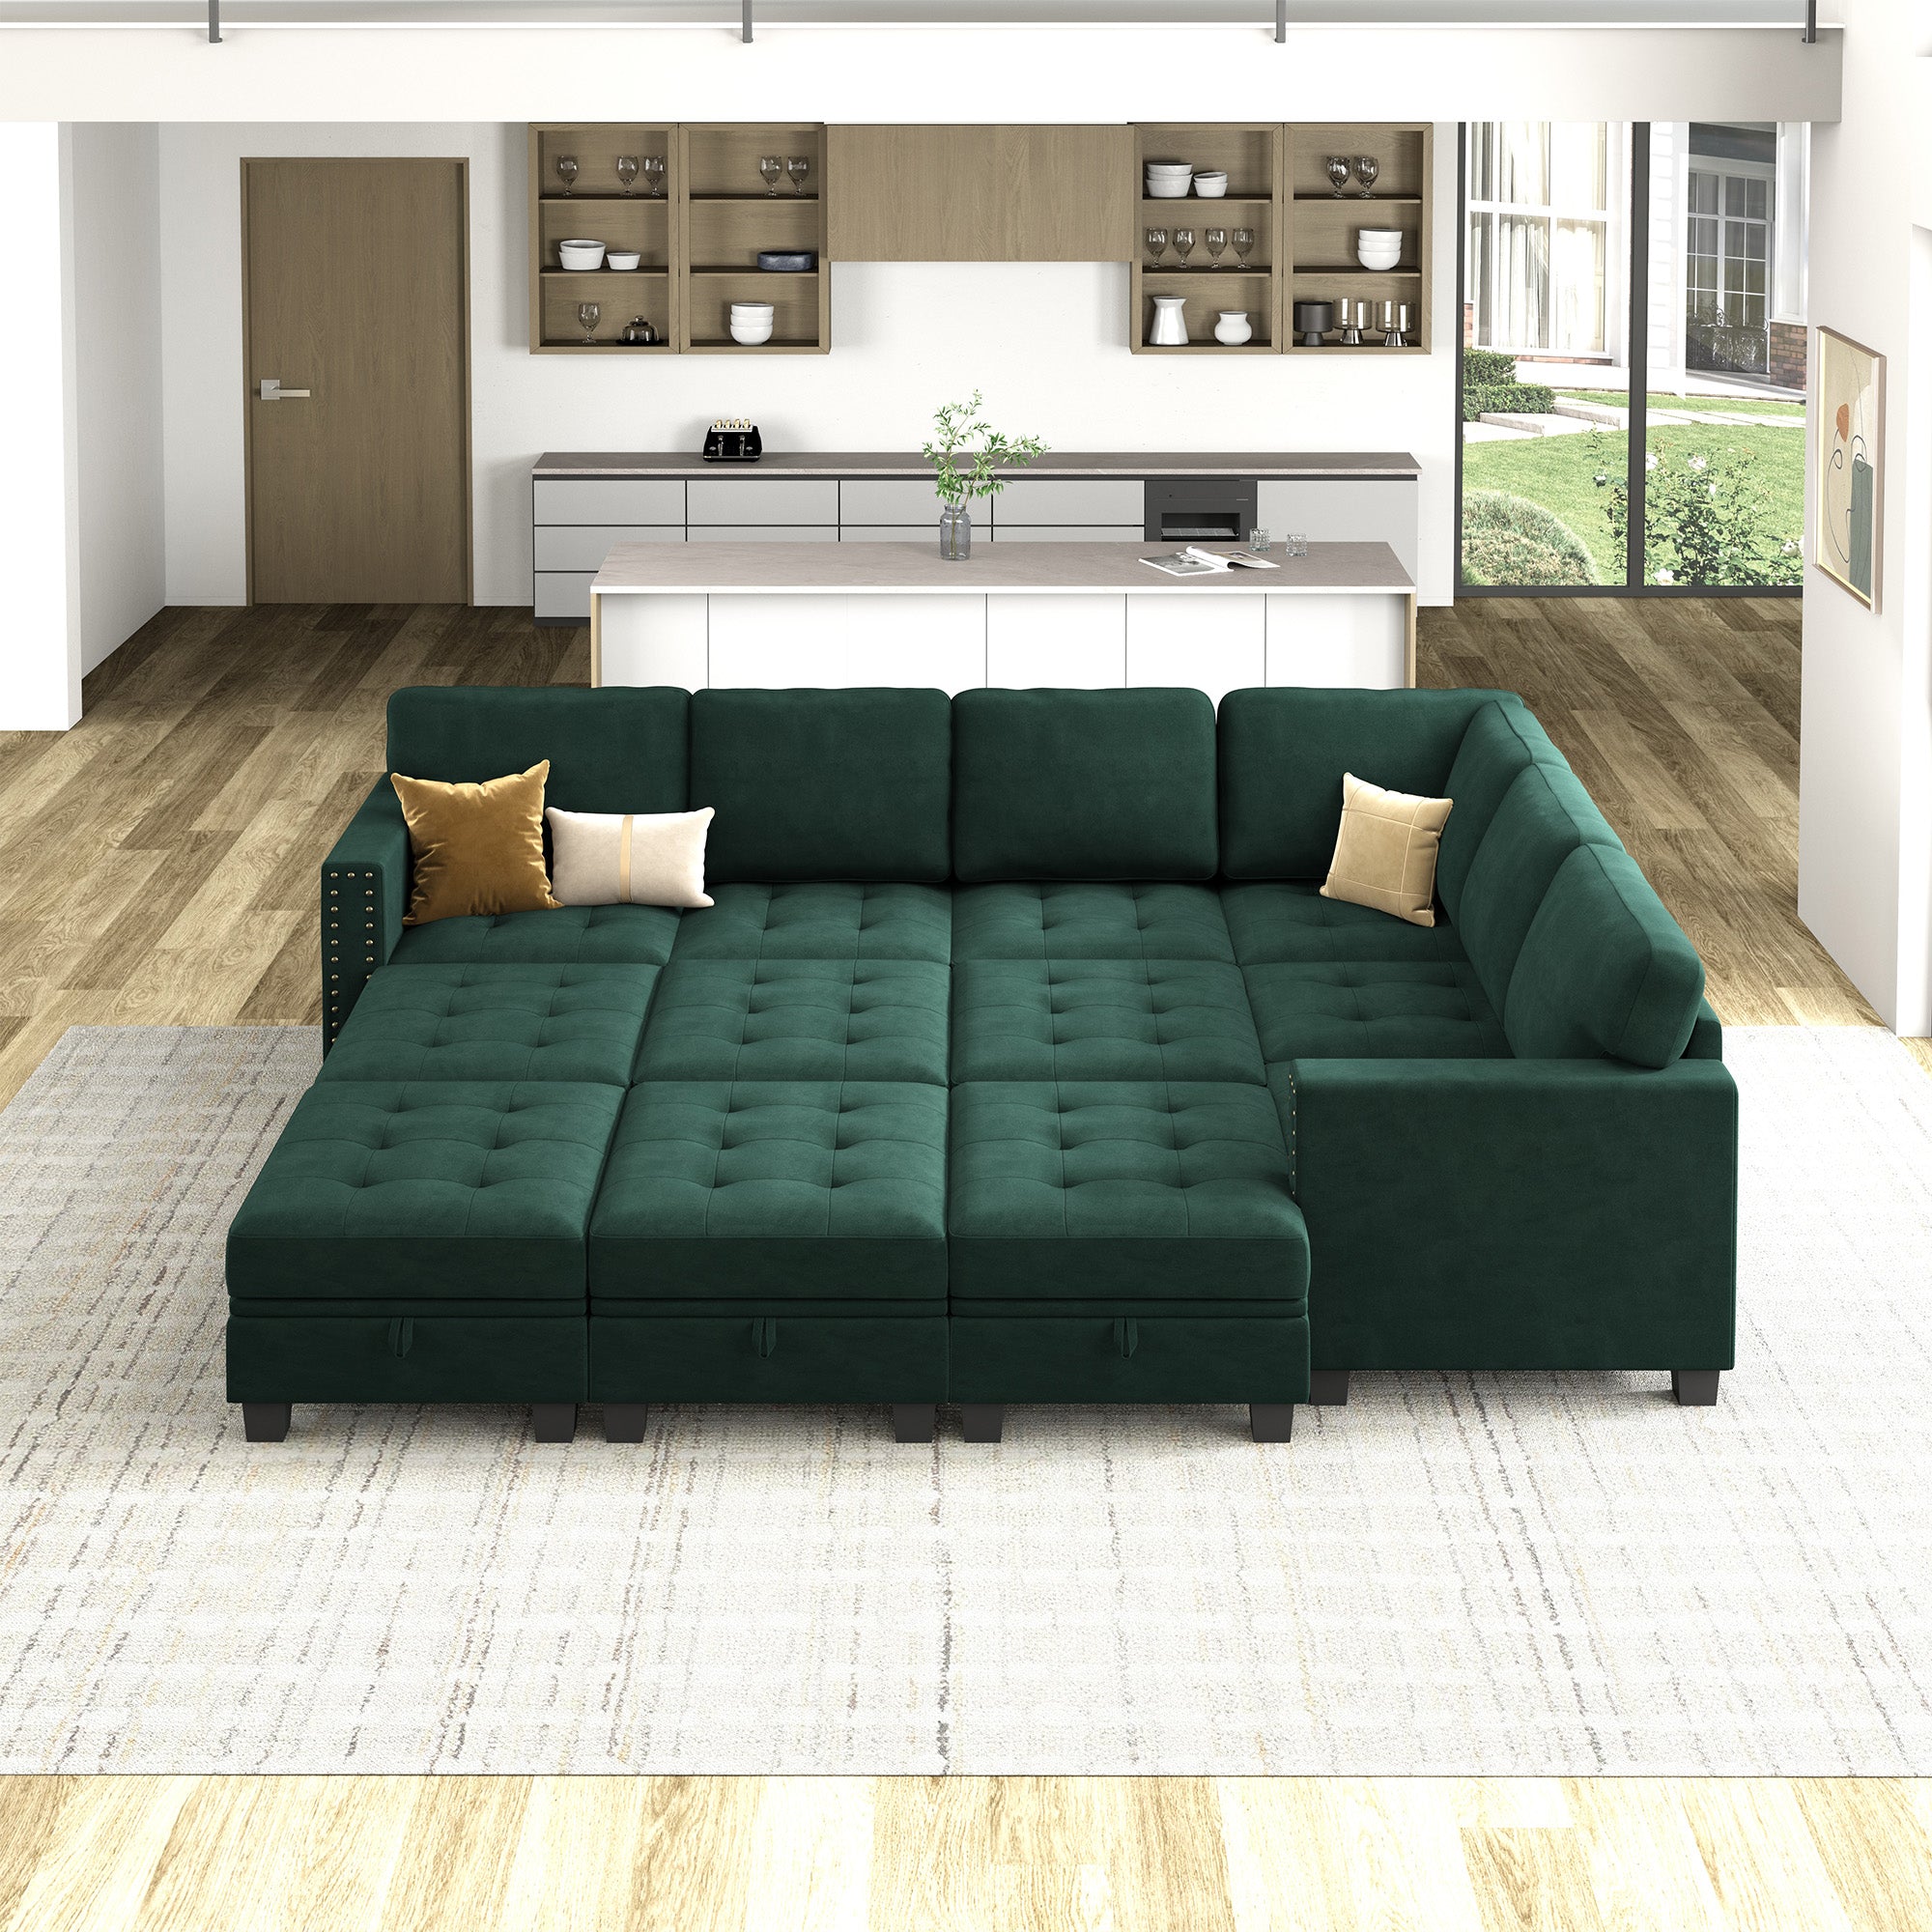 HONBAY Wraparound Modular Sofa 12-Seat With 5-Storage Space+1-Left Arm+1-Right Arm #Color_Green